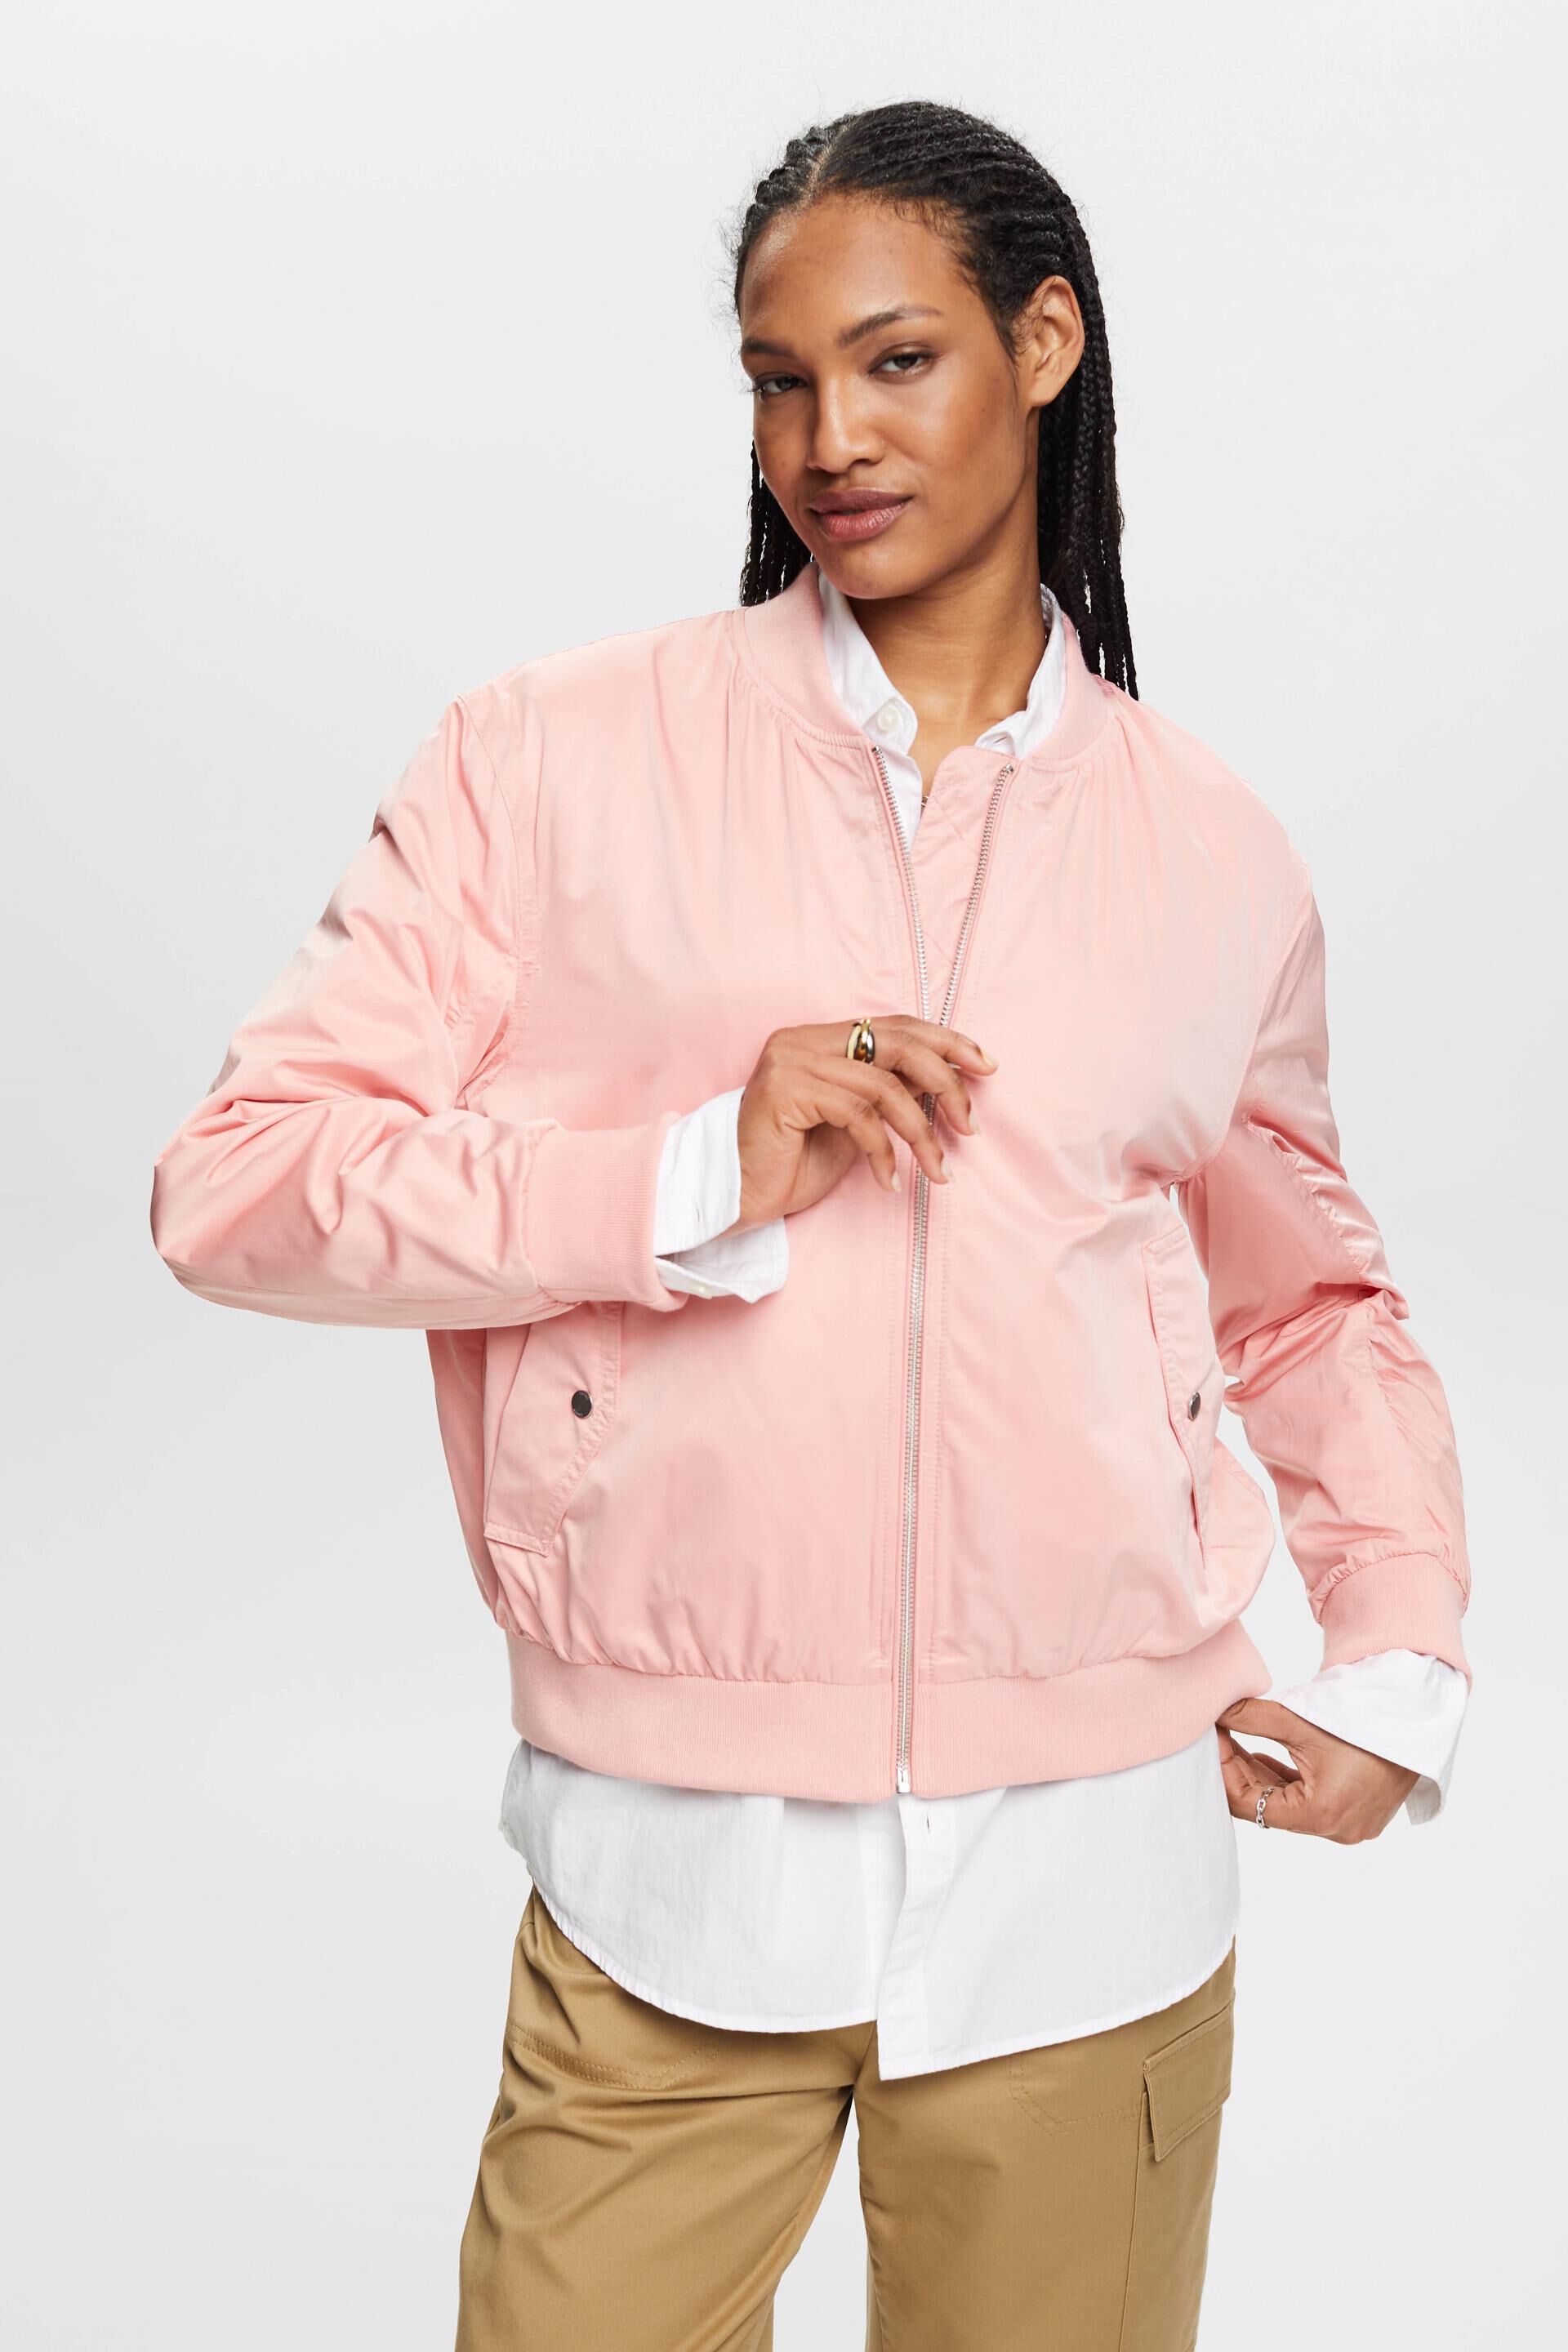 Buy PAUSE Sport Cotton Bomber Jacket for Men's, Jacket for Boy's,  Attractive Full Sleeves Mens Jacket, Winter Jackets for Men, Boys Adults,  Mens Jackets for Winter Wear (Pink PAJKT1482-PCH) Online In India